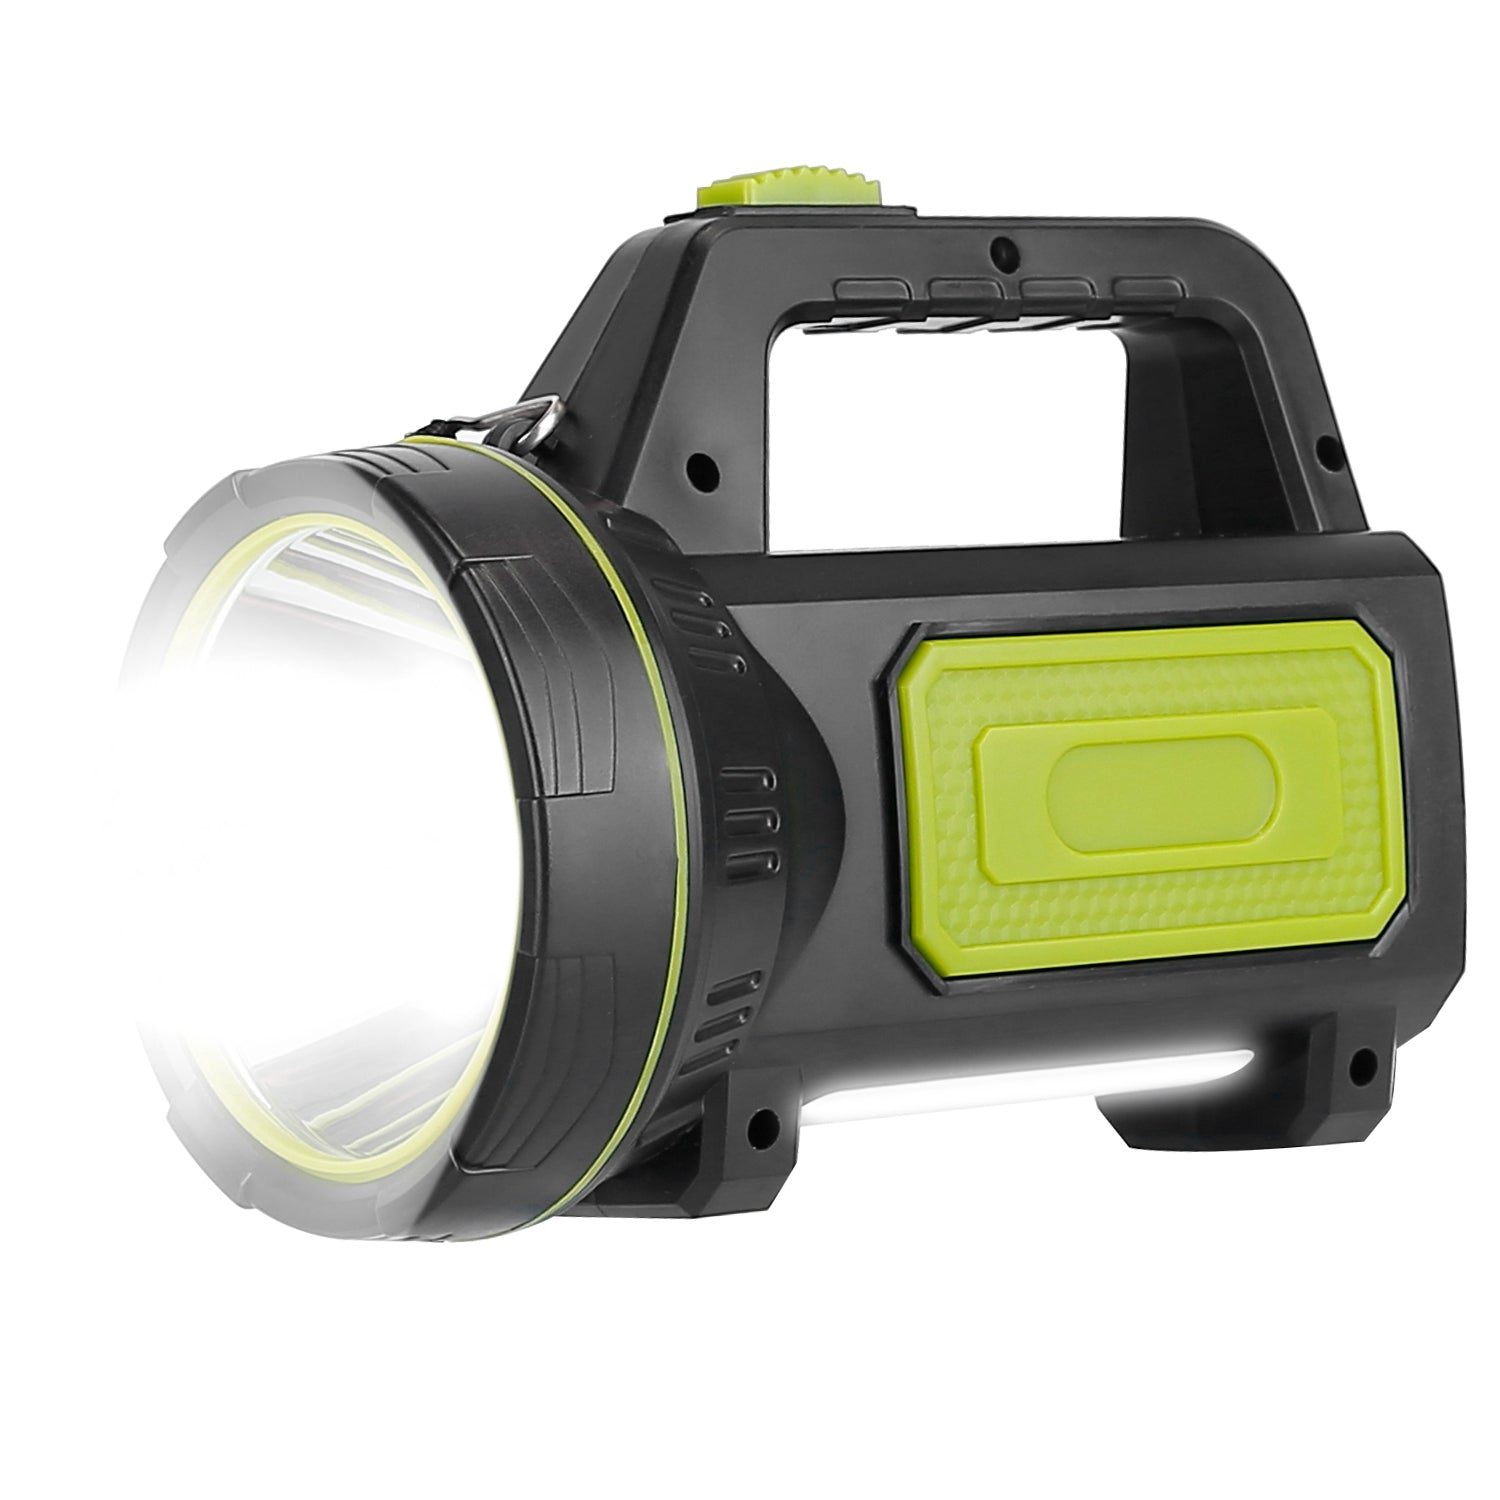 title:100000LM Super Bright LED Searchlight Portable Rechargeable Handheld Flashlight Waterproof Main Side Emergency Spotlight Camping Lantern;color:Black